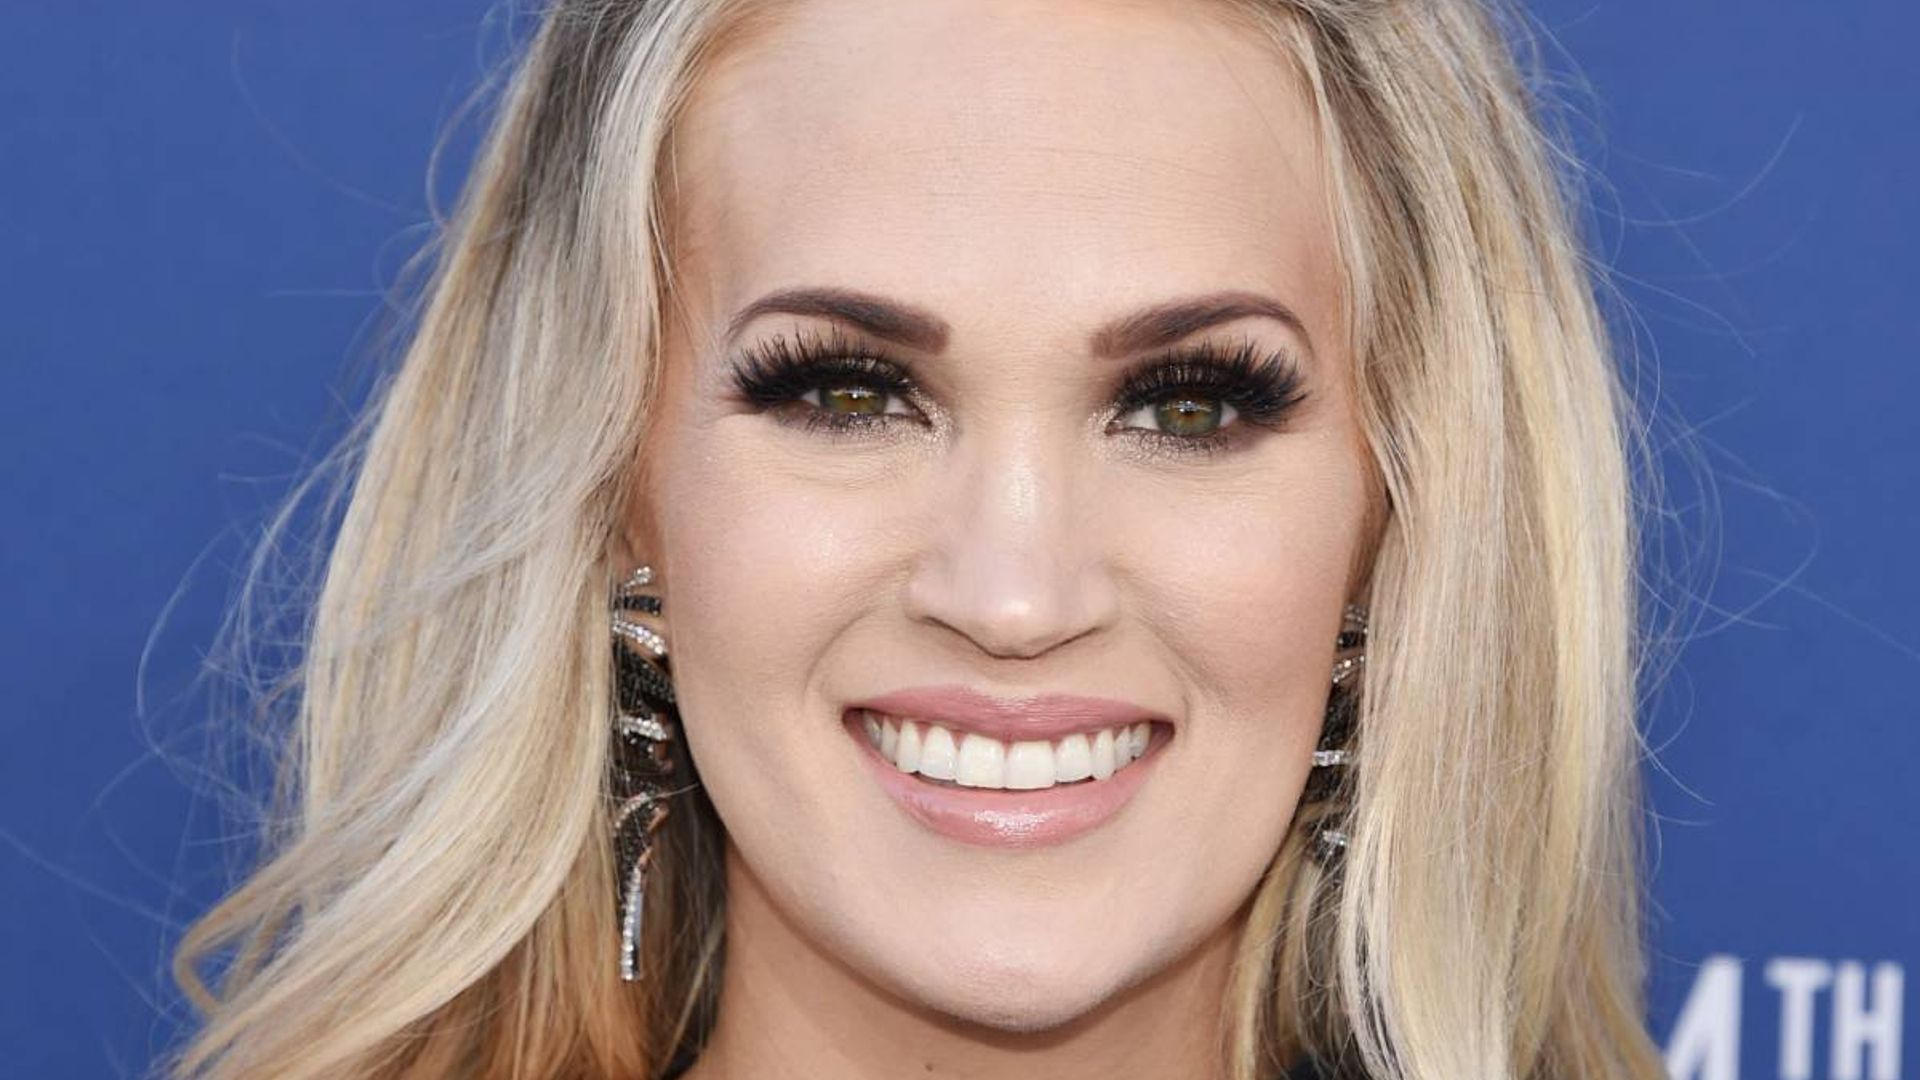 Carrie Underwood jaw-dropping appearance may be her most impressive look  yet